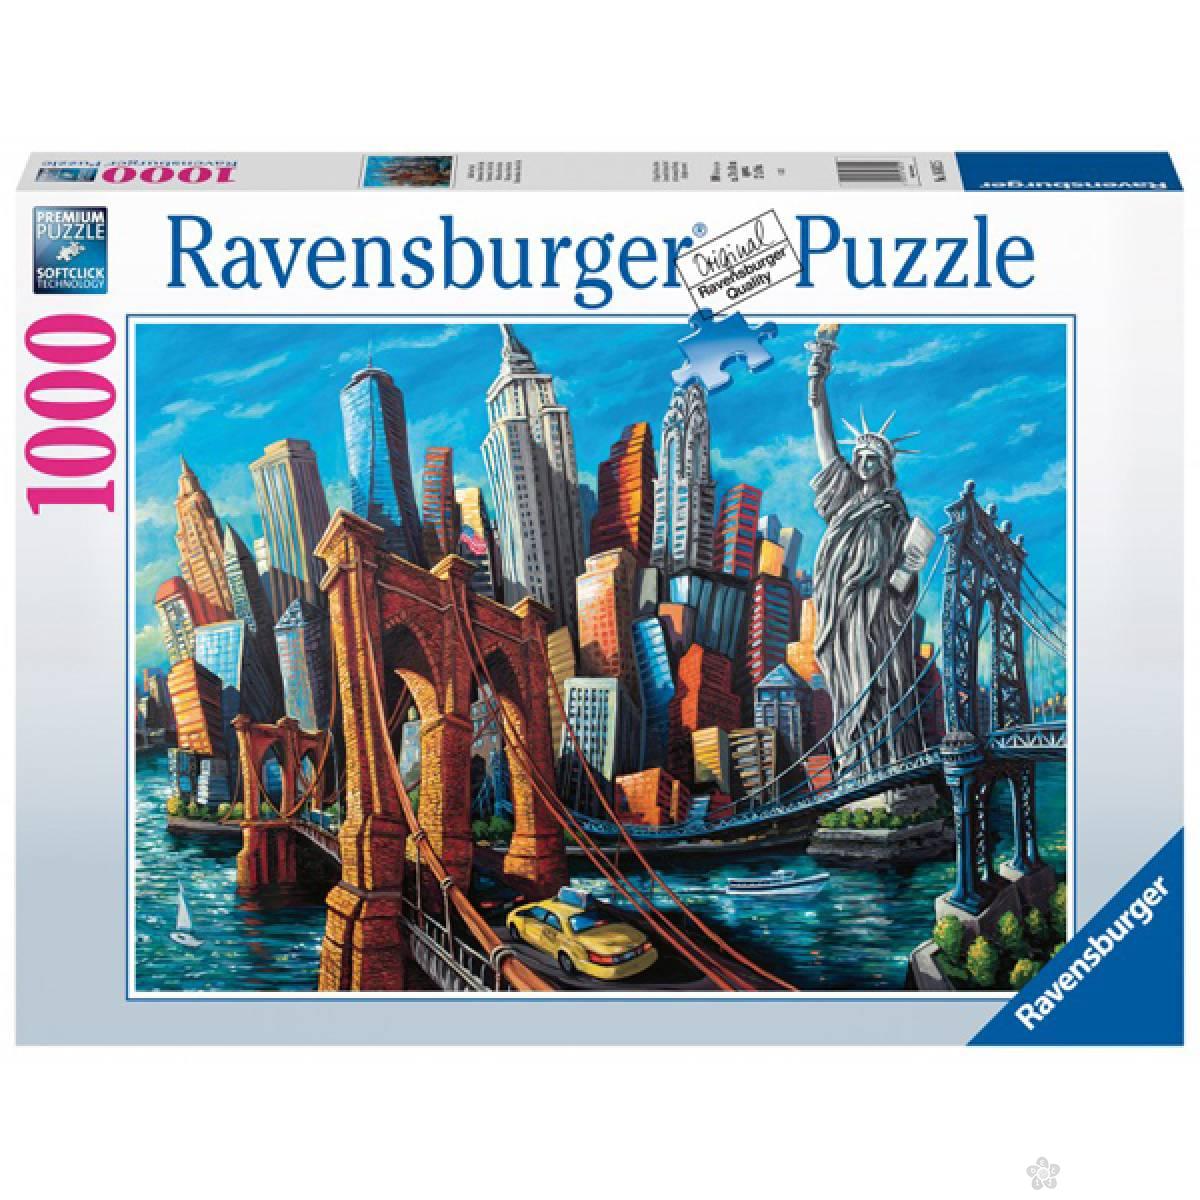 Ravensburger puzzle Welcome to New York RA16812 